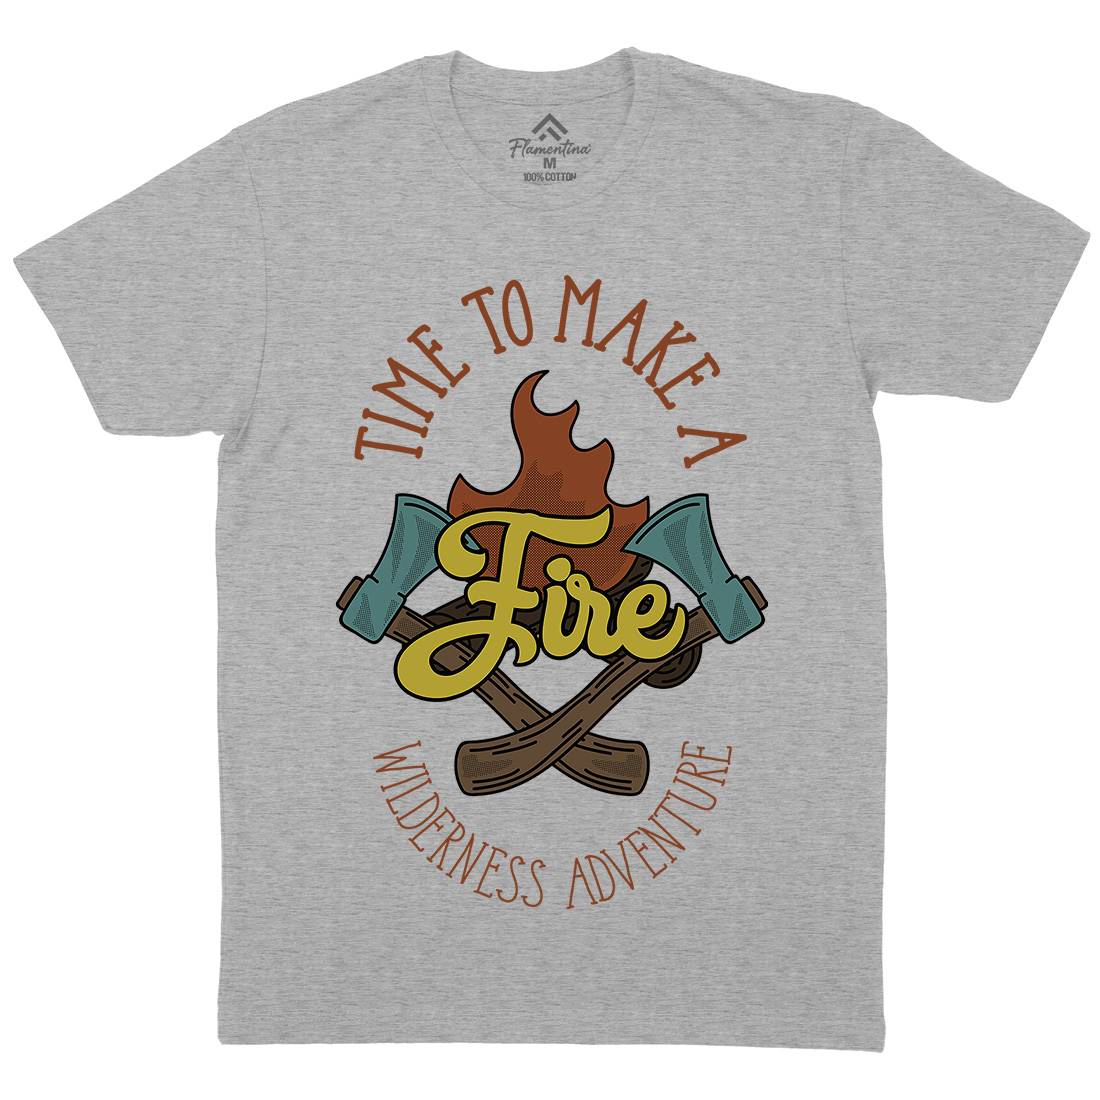 Time To Make Fire Mens Organic Crew Neck T-Shirt Nature D992